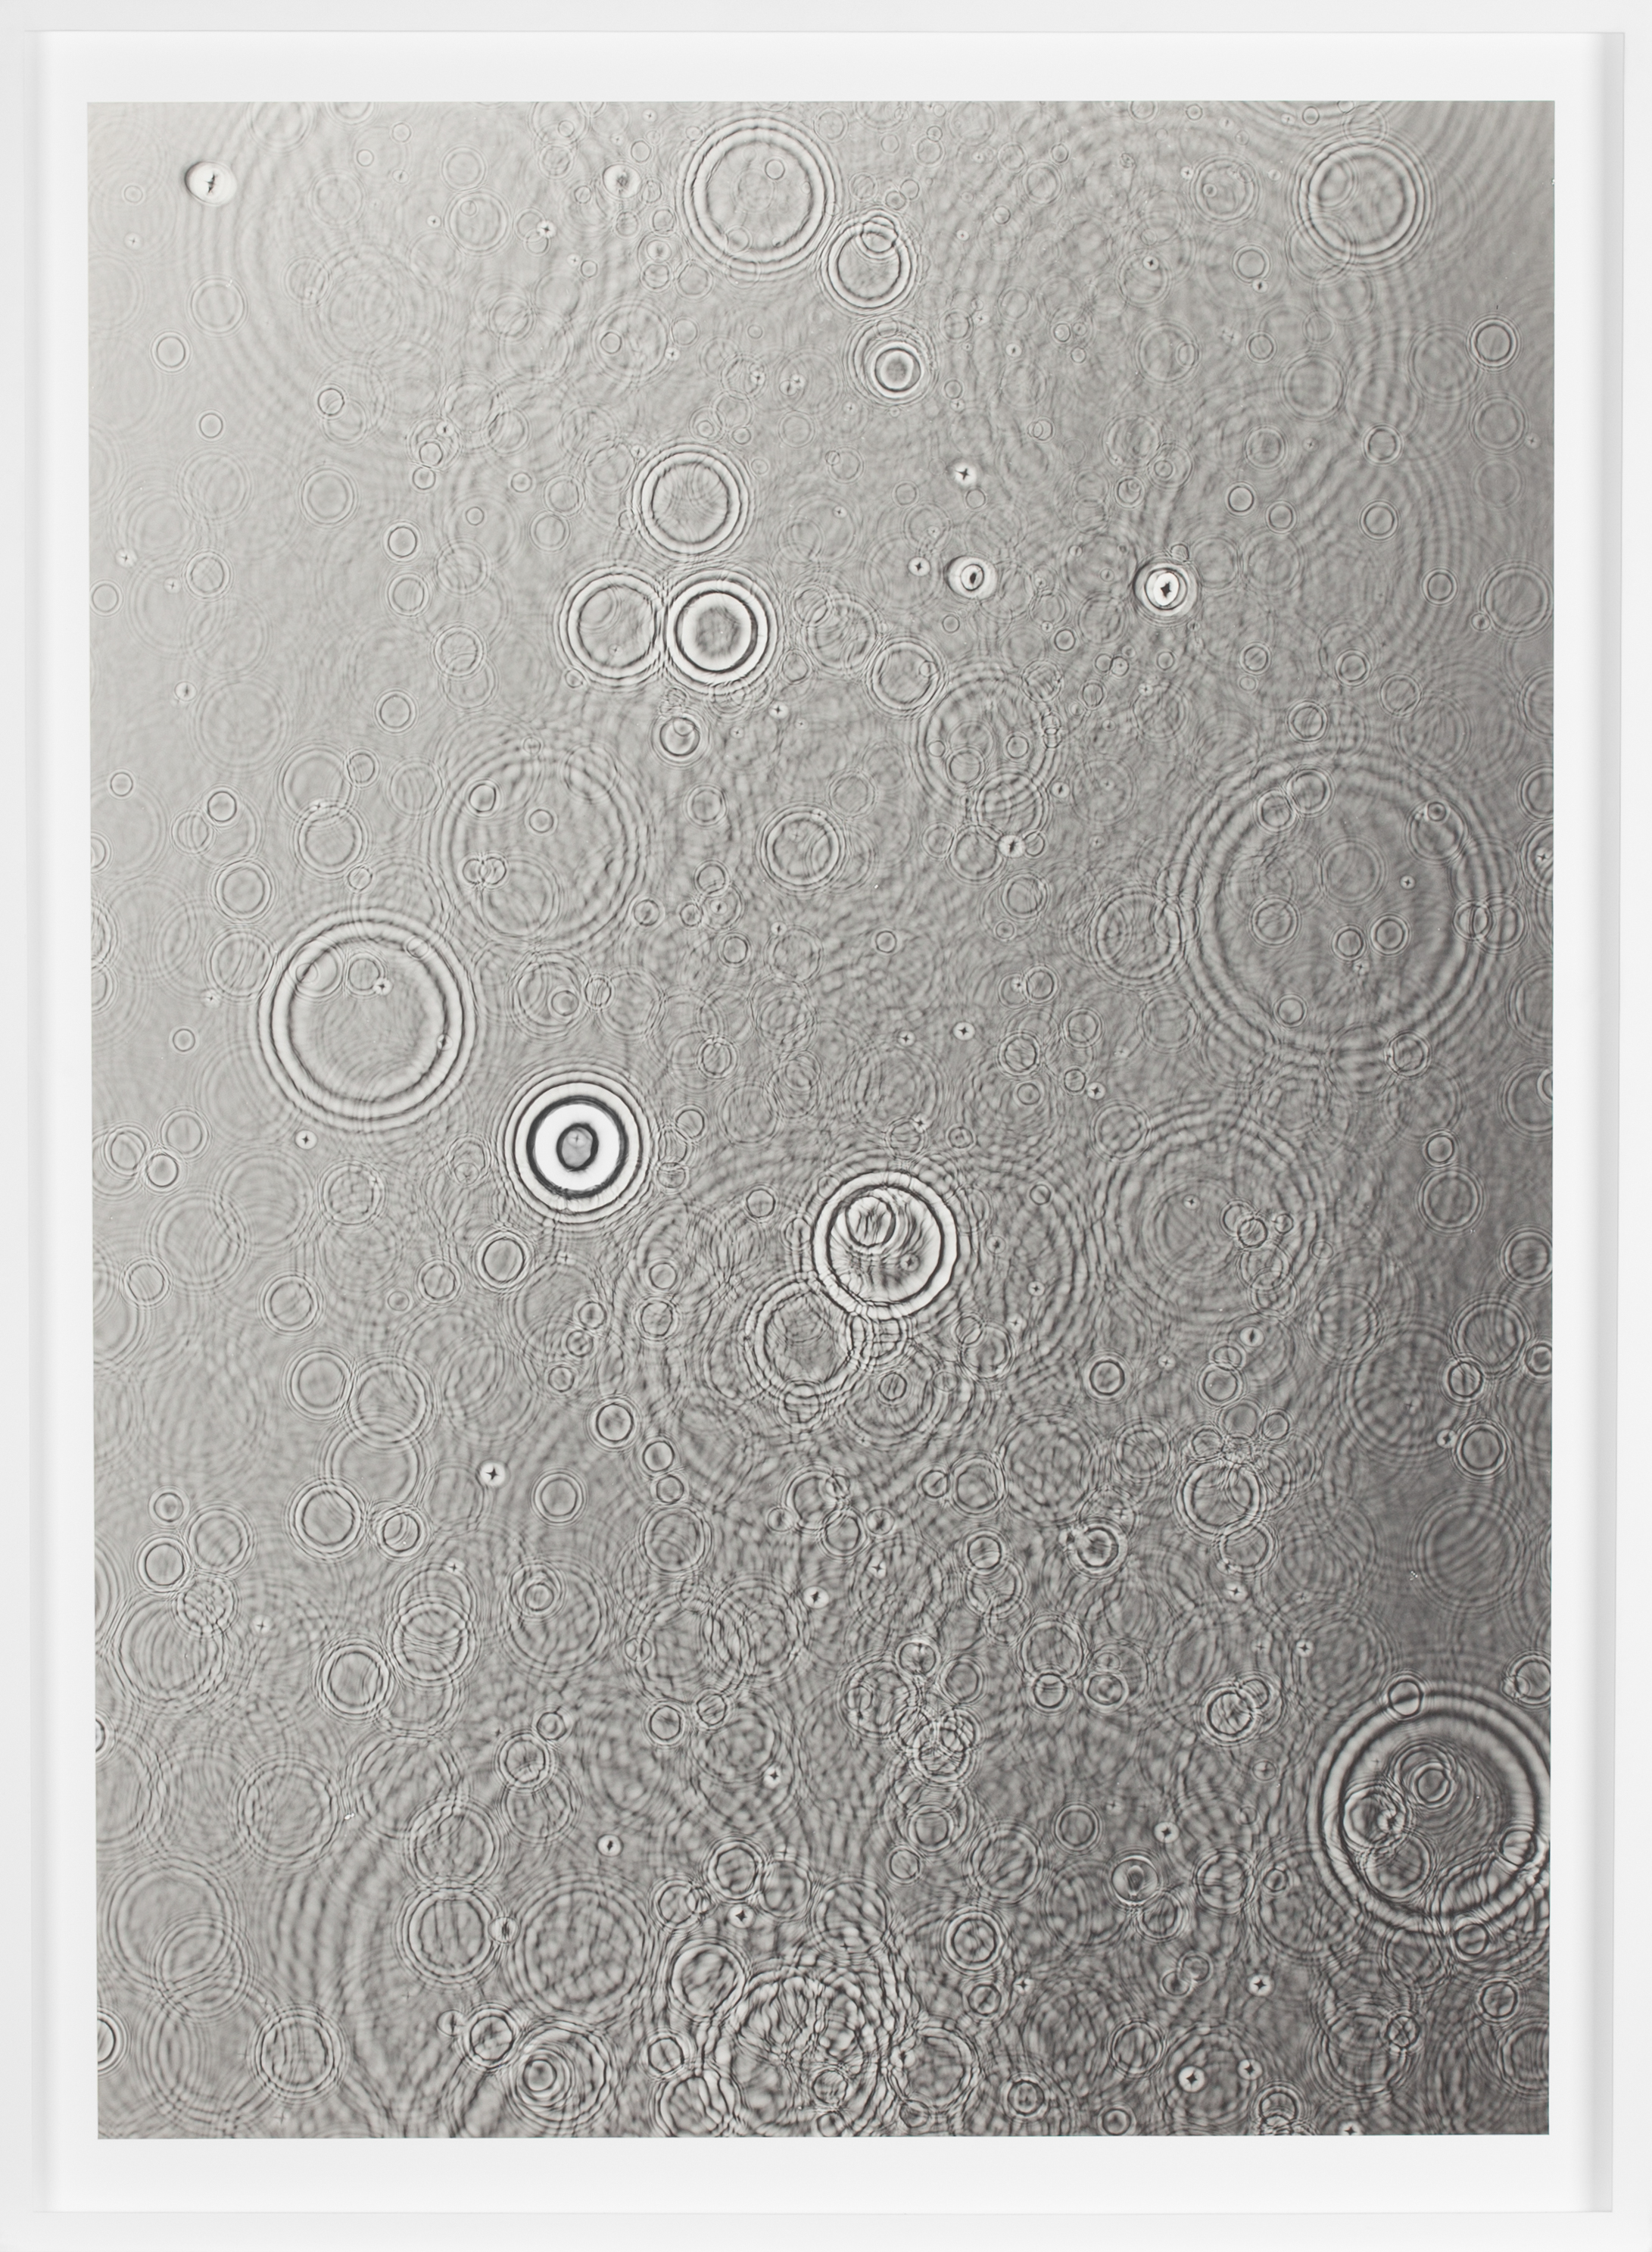 Color image of a grey toned photogram depicting water droplets cascading on the surface framed in white